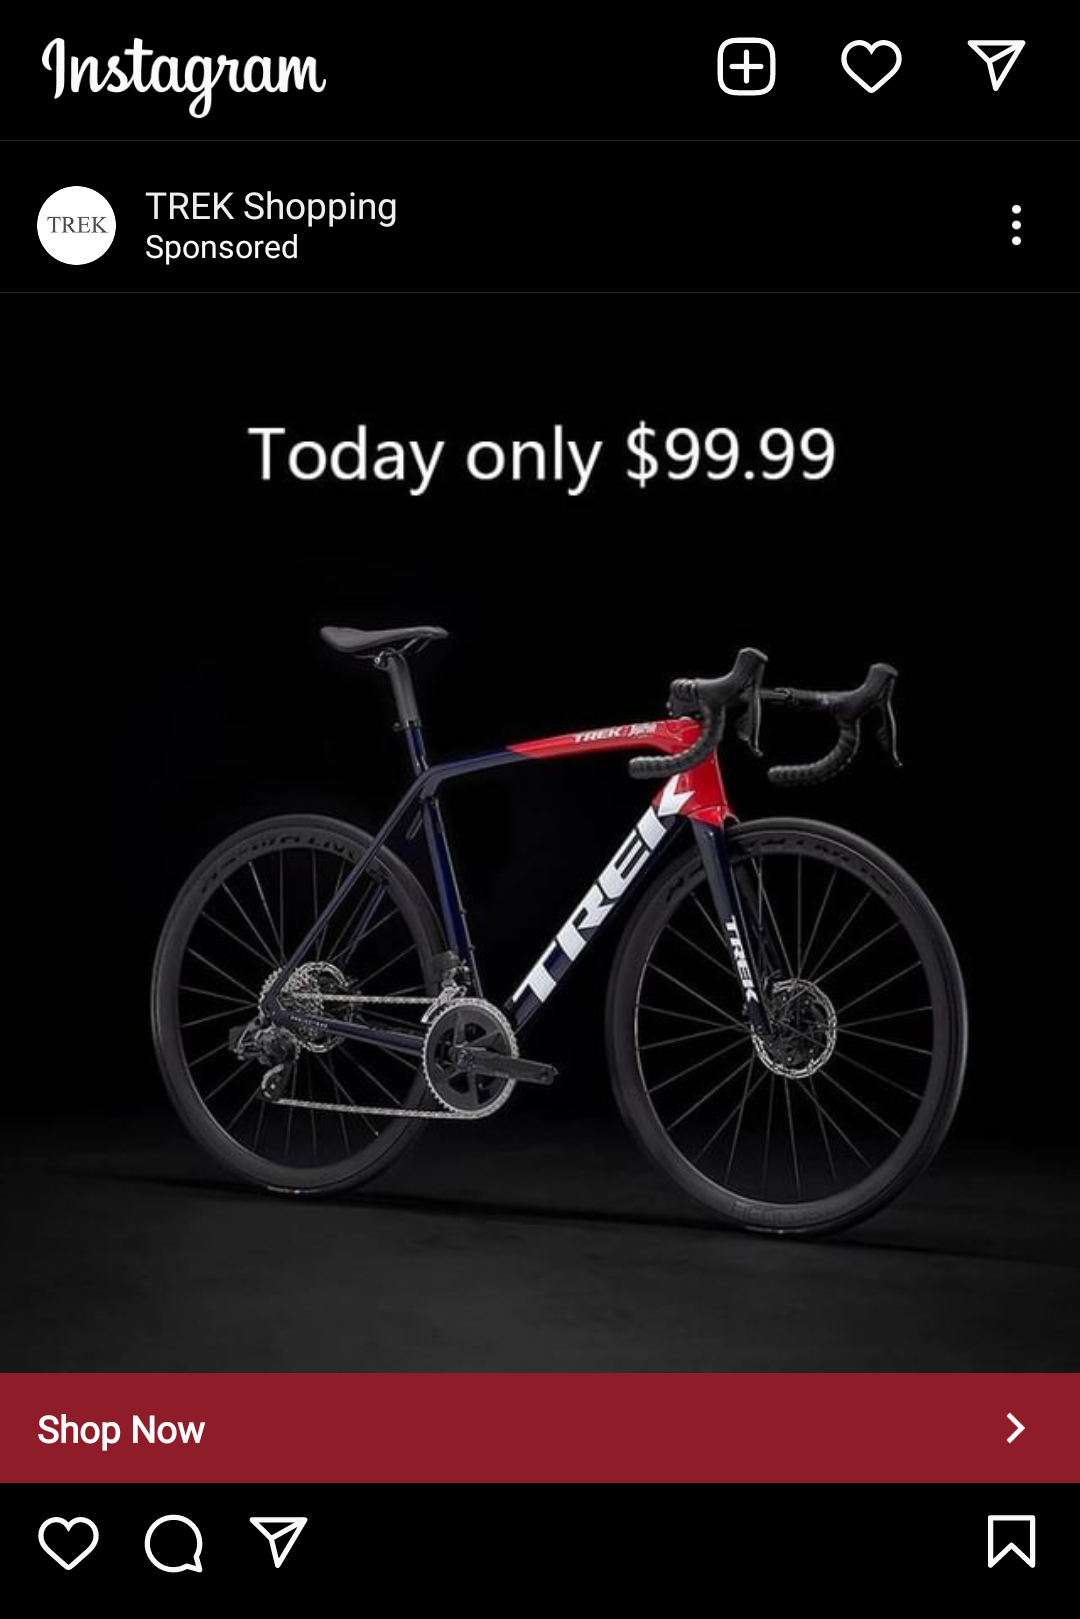 Scam Ad on instagram claiming Trek bike was on sale for $99